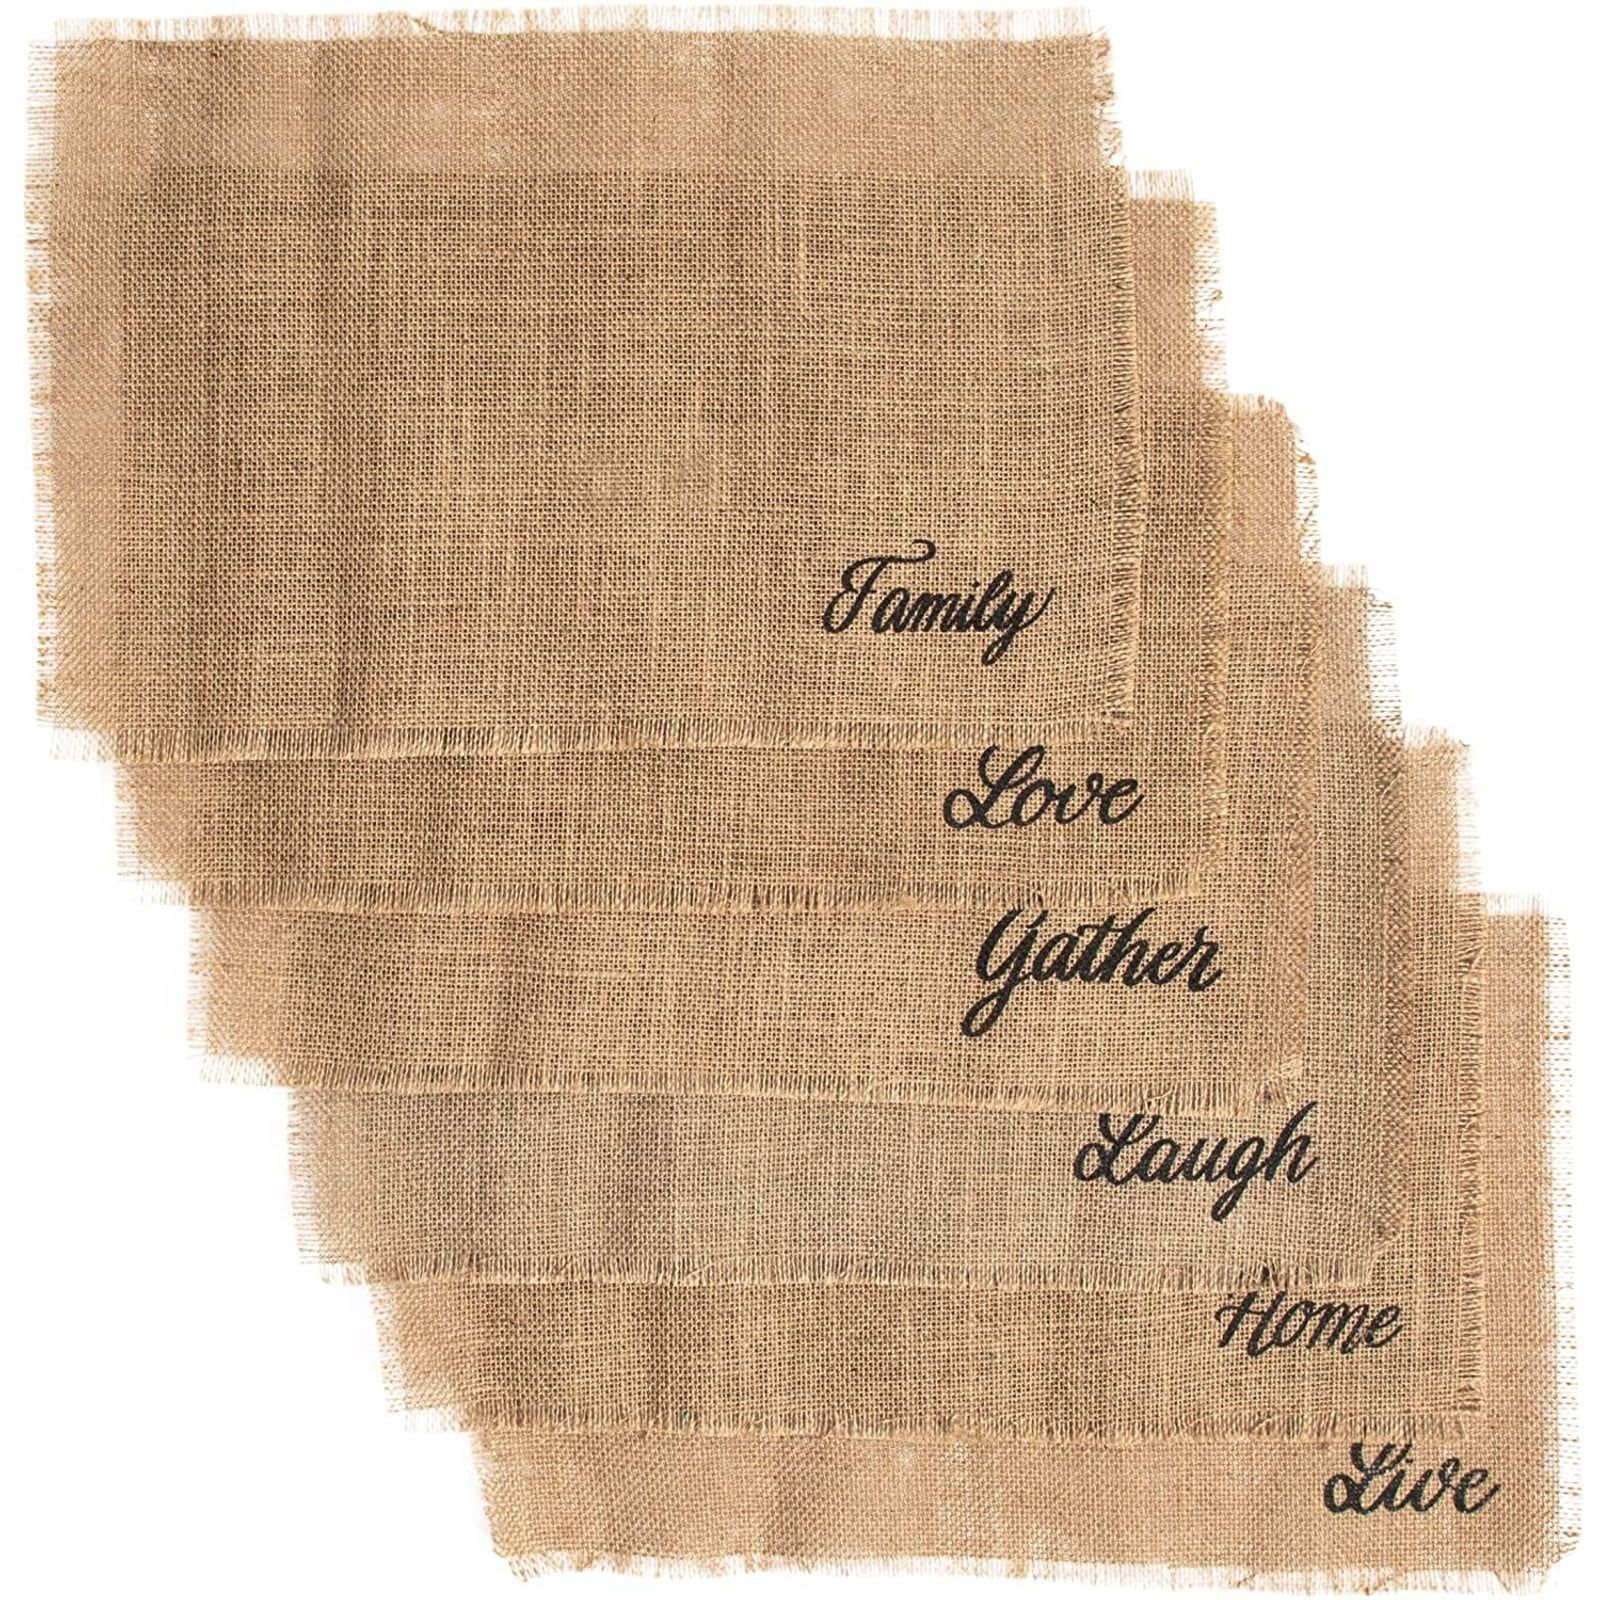 Woven Jute Placemats Set of 6 Dining Table Mat, Love Live Laugh Home Gather Family, 18"x12" Brown | Walmart (US)